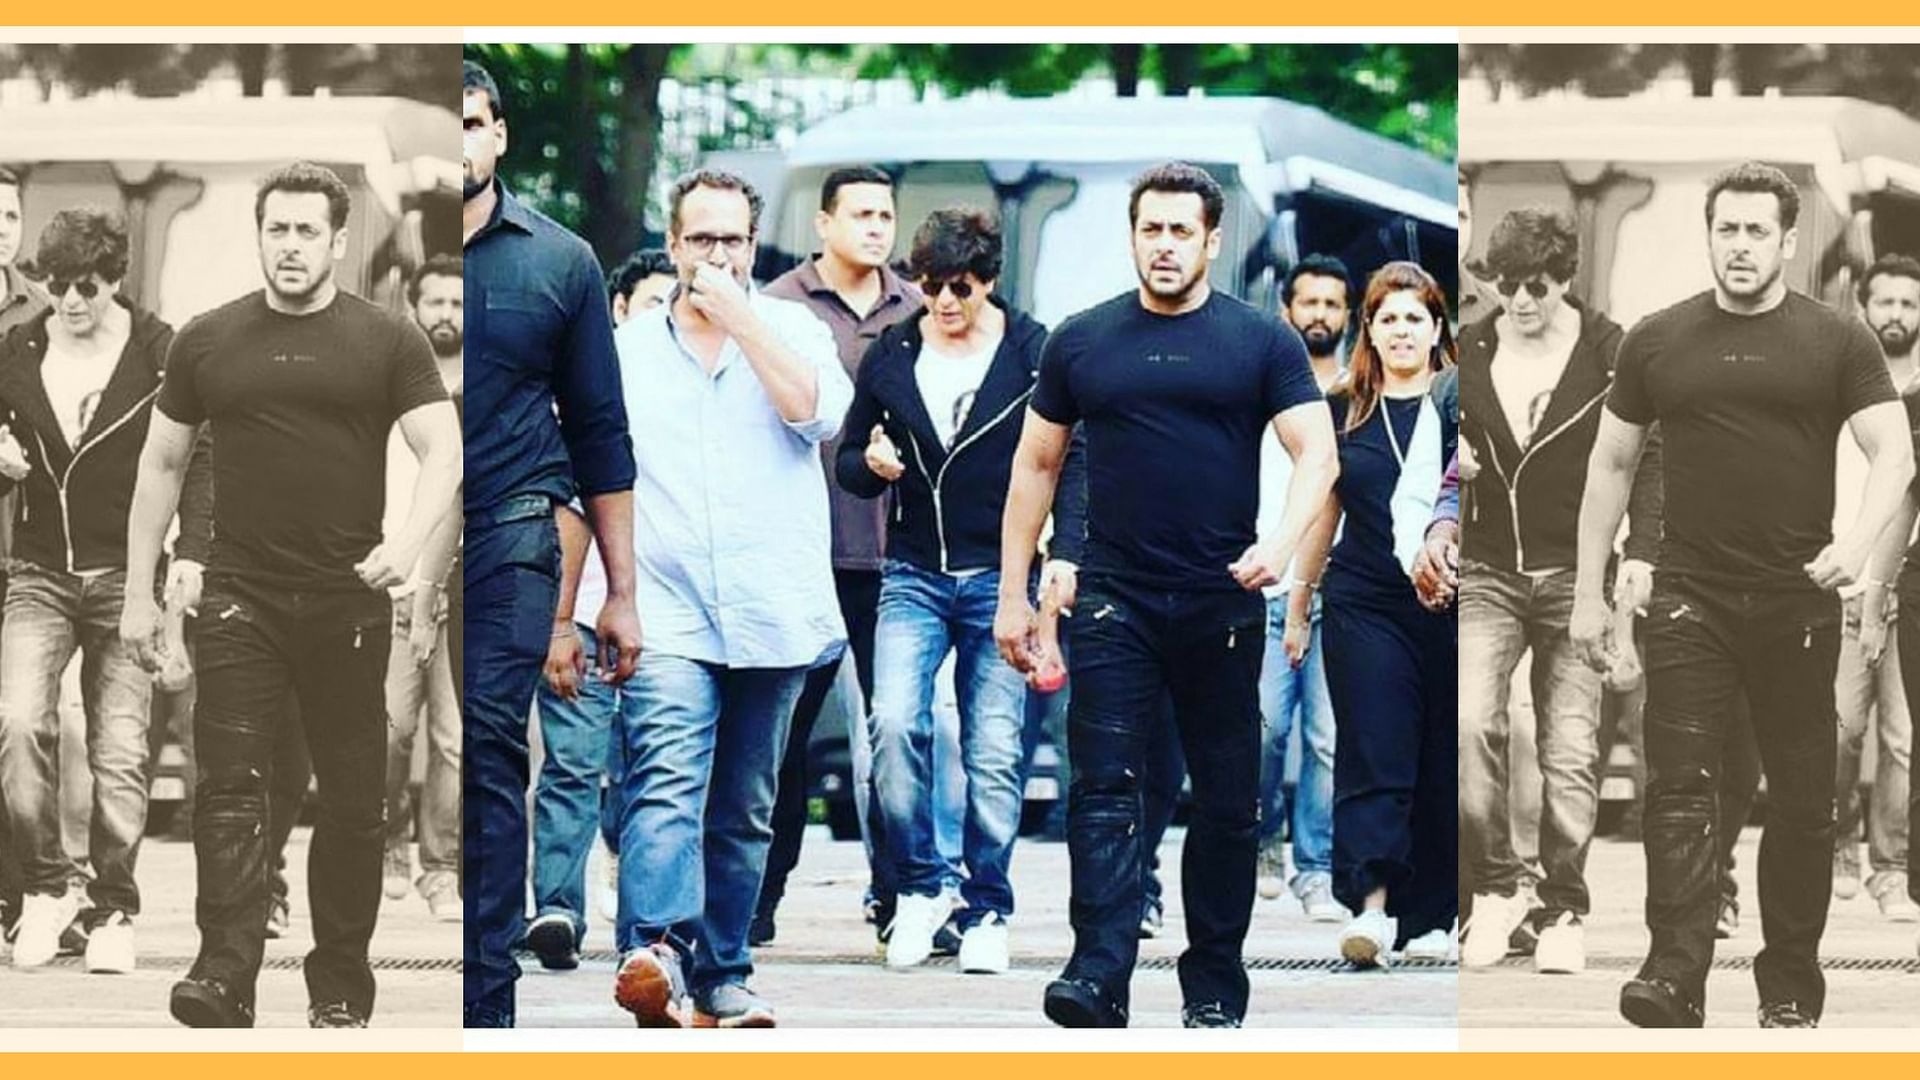 Aanand L Rai with Shah Rukh and Salman Khan on the sets of <i>Zero.</i>&nbsp;